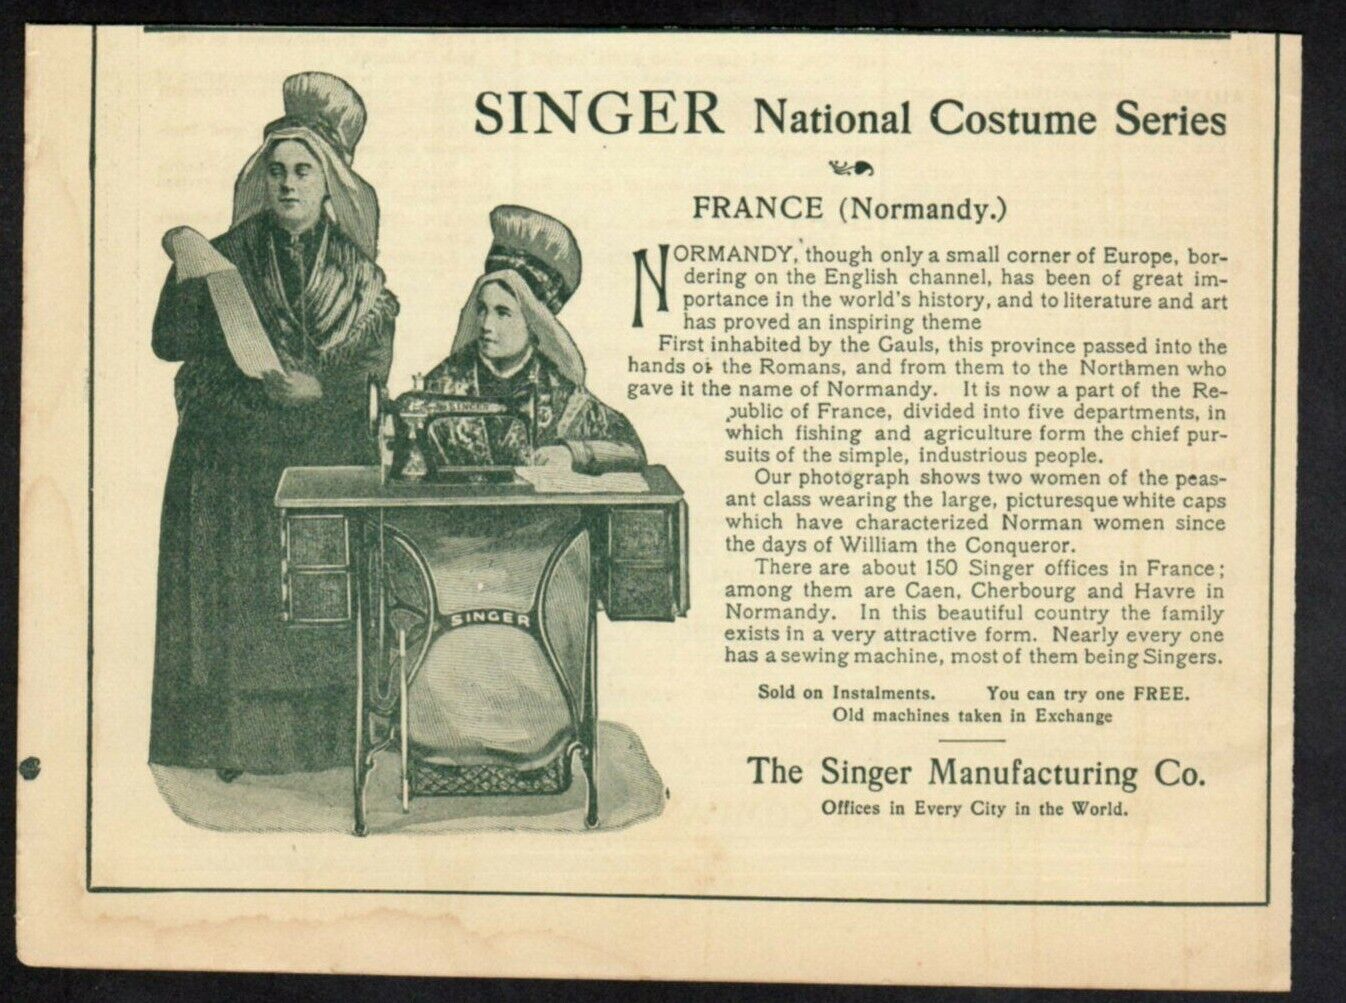 Vintage Fashion ad 1899 Singer Sewing Machine National Costume Series NORMANDY